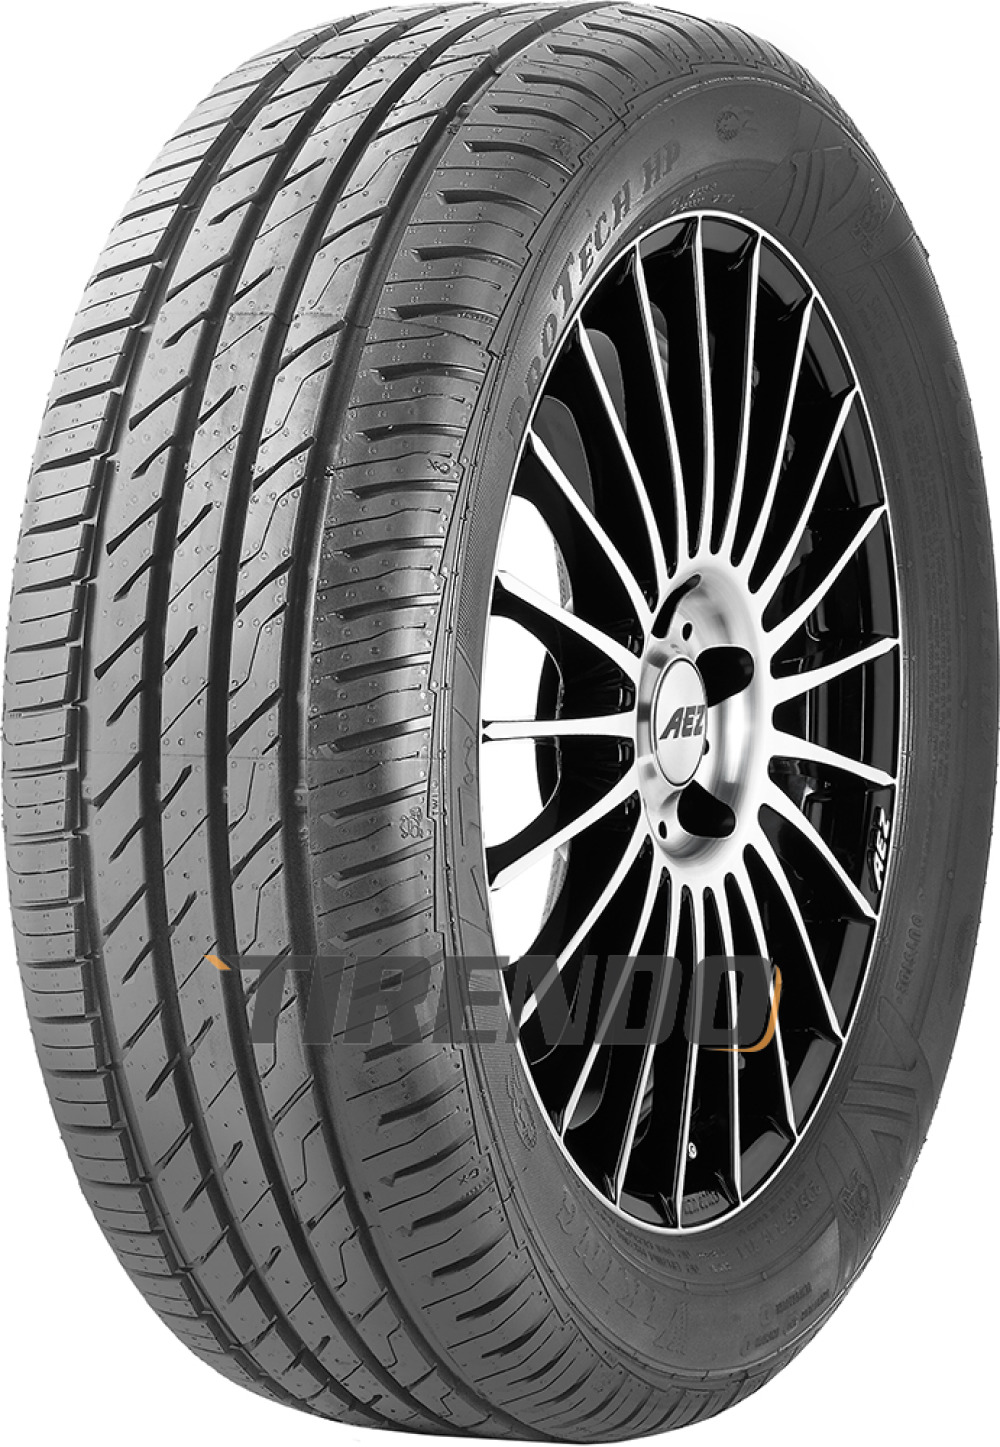 Image of Viking ProTech HP ( 185/55 R14 80H )